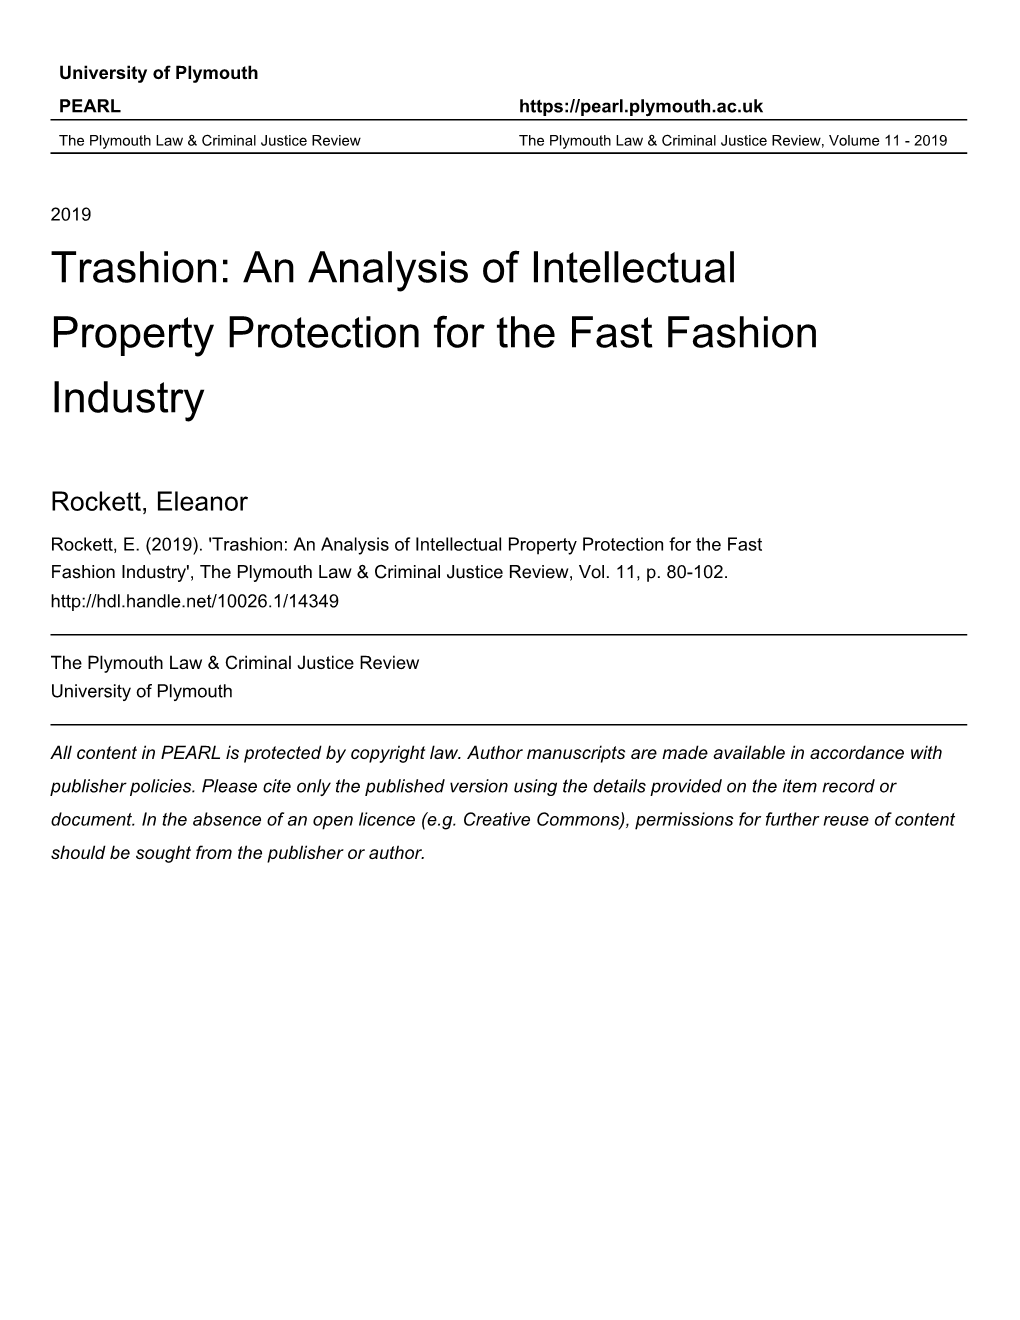 An Analysis of Intellectual Property Protection for the Fast Fashion Industry